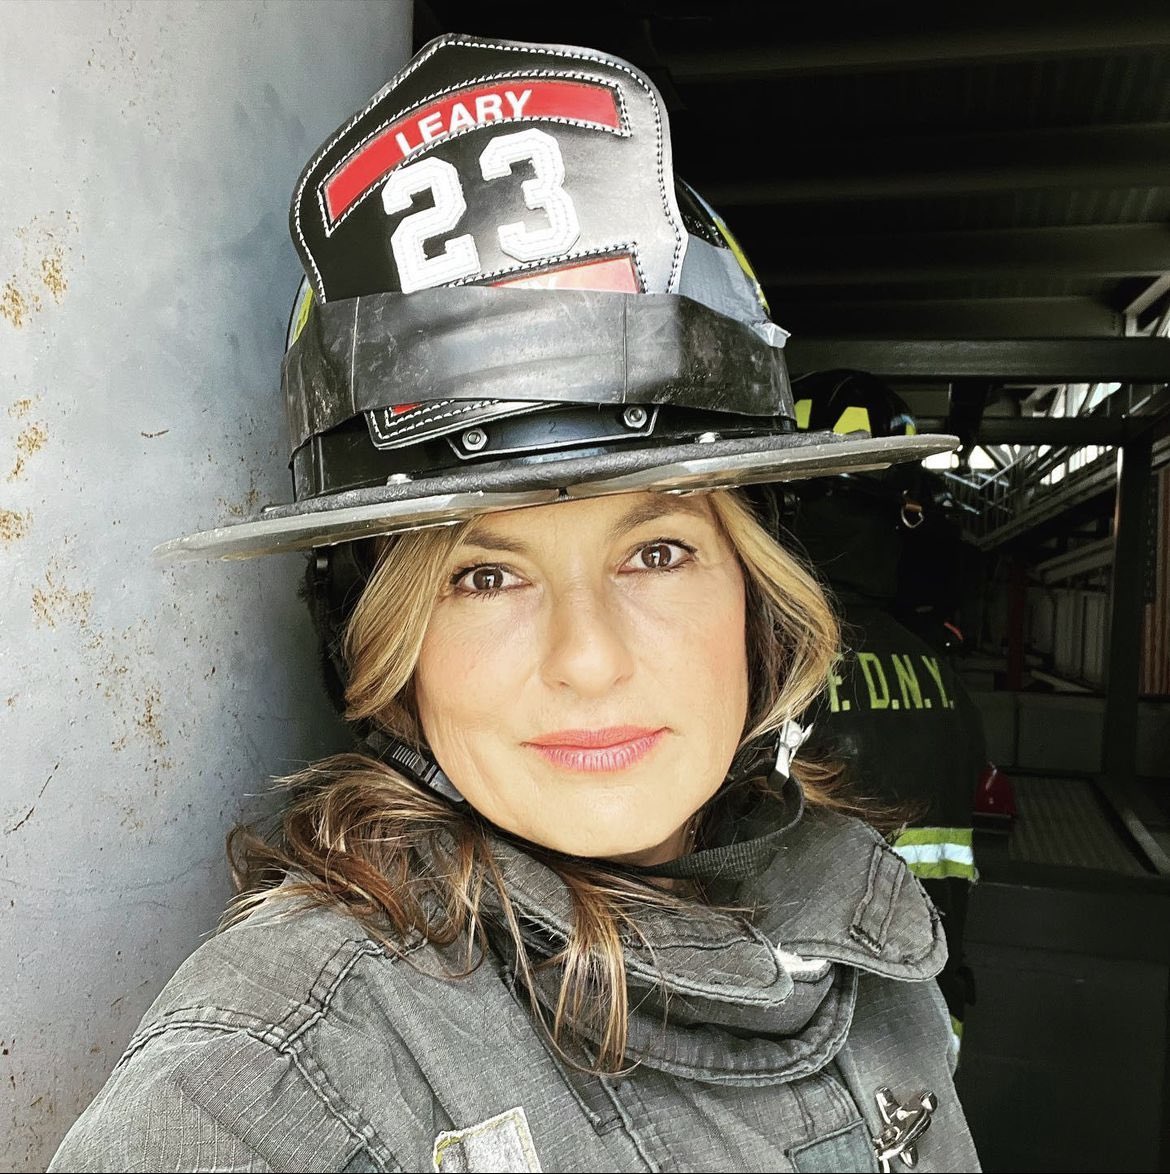 How precious does our Queen look in the firefighter outfit?! #MariskaHargitay out with the @LearyFF for #InternationalFirefightersDay.